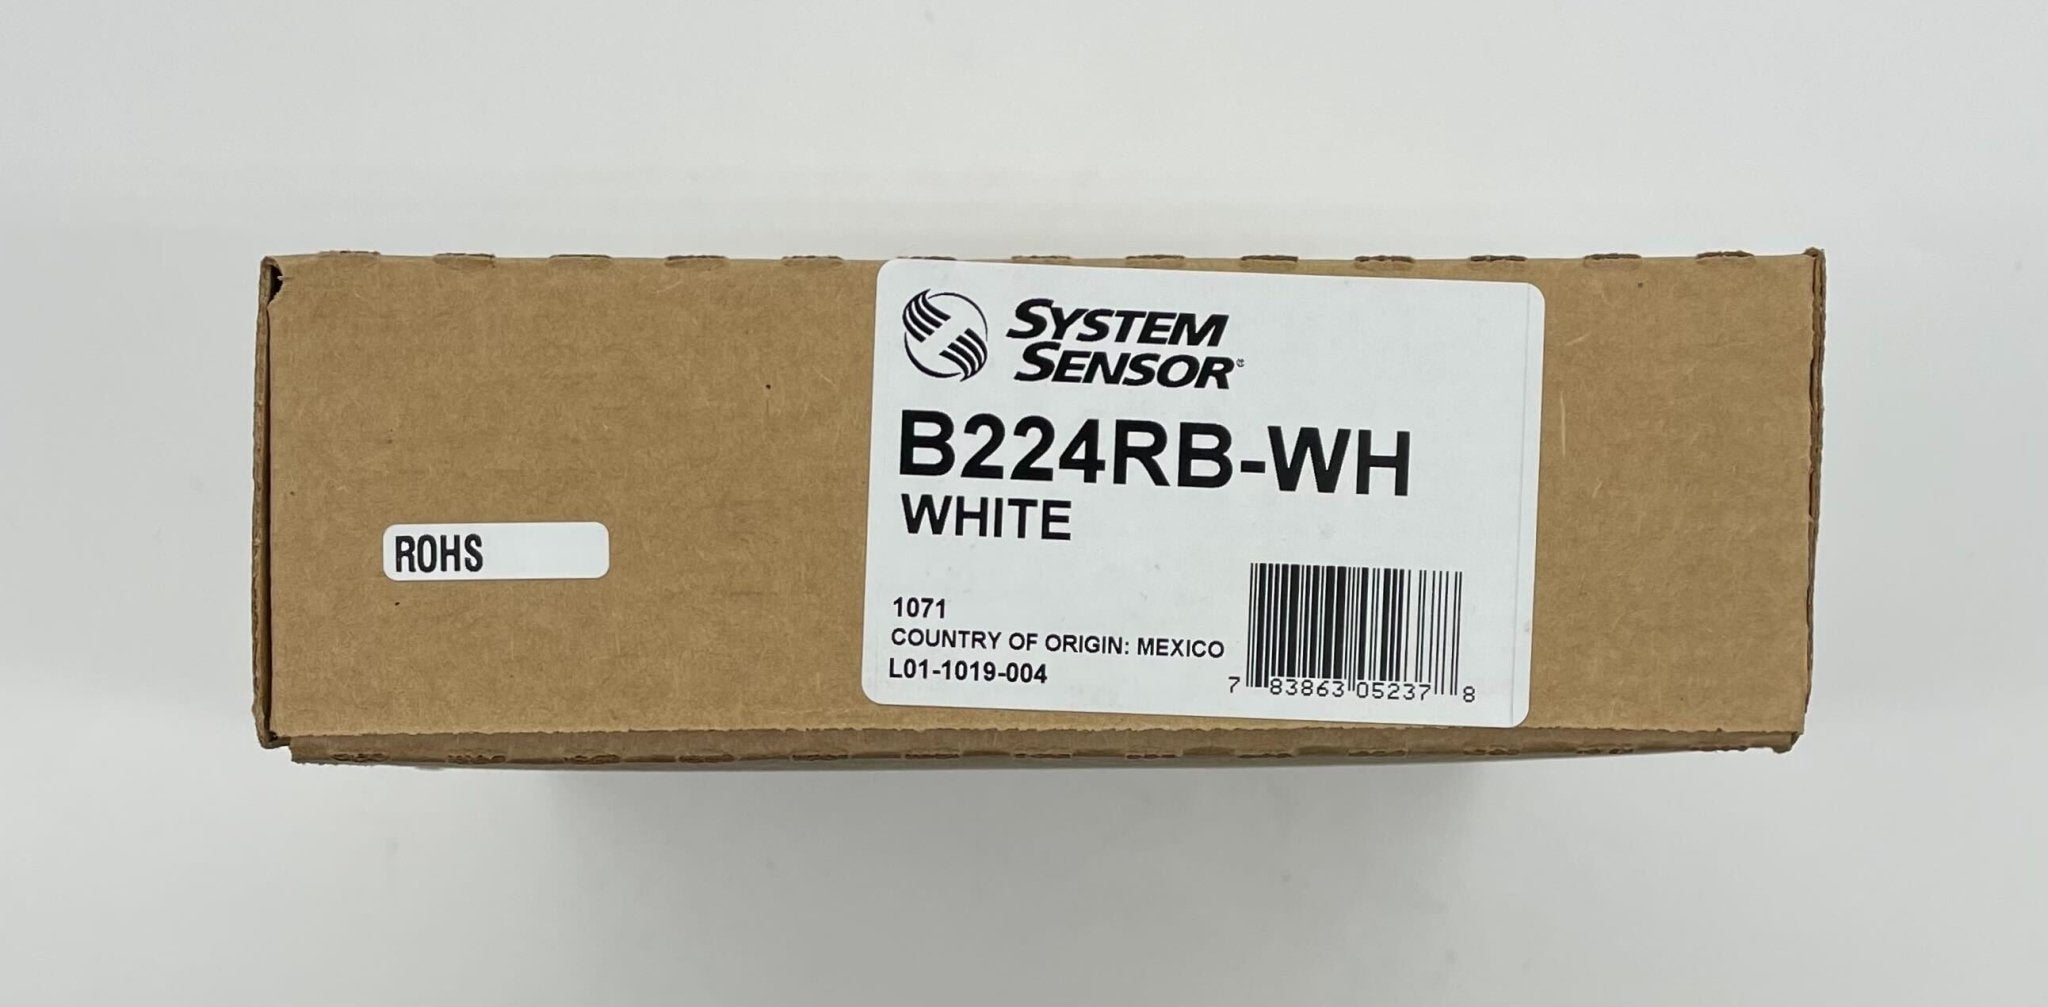 System Sensor B224RB-WH - The Fire Alarm Supplier